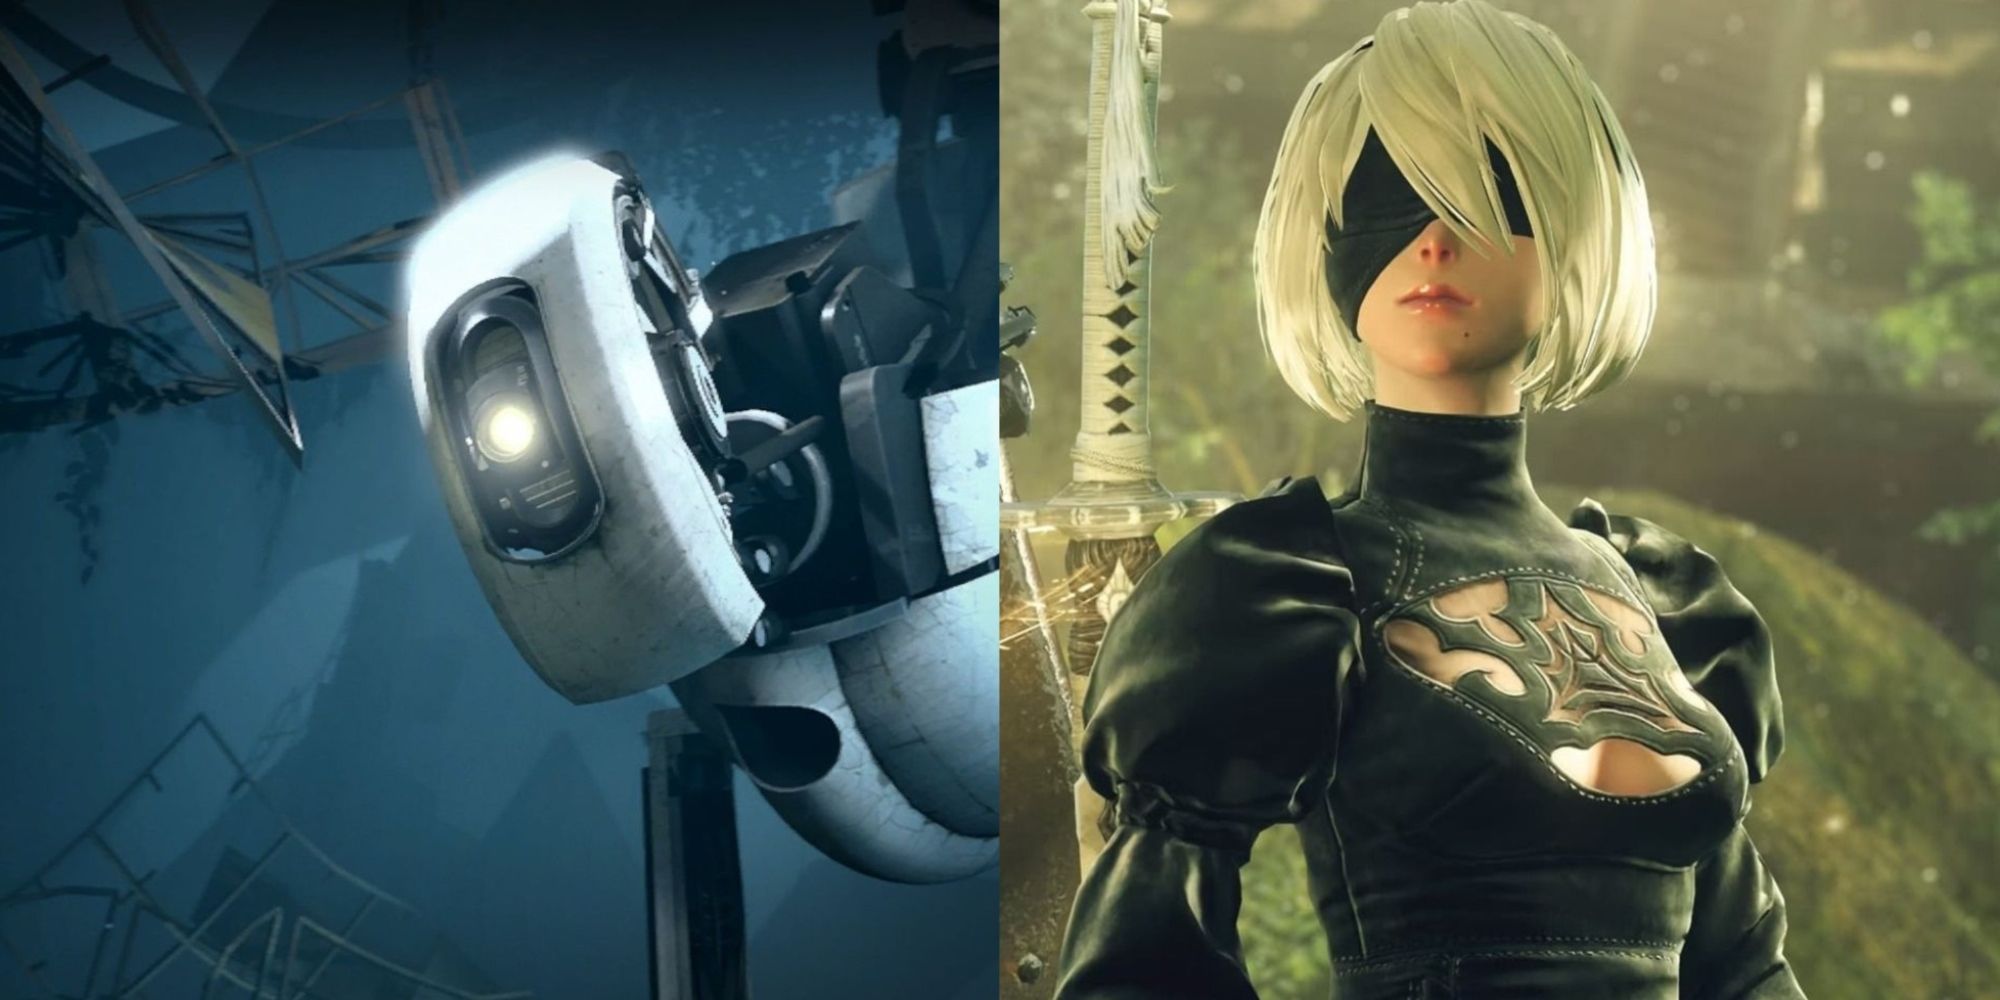 Games About AI Featured Split Image Portal 2 and Nier Automata